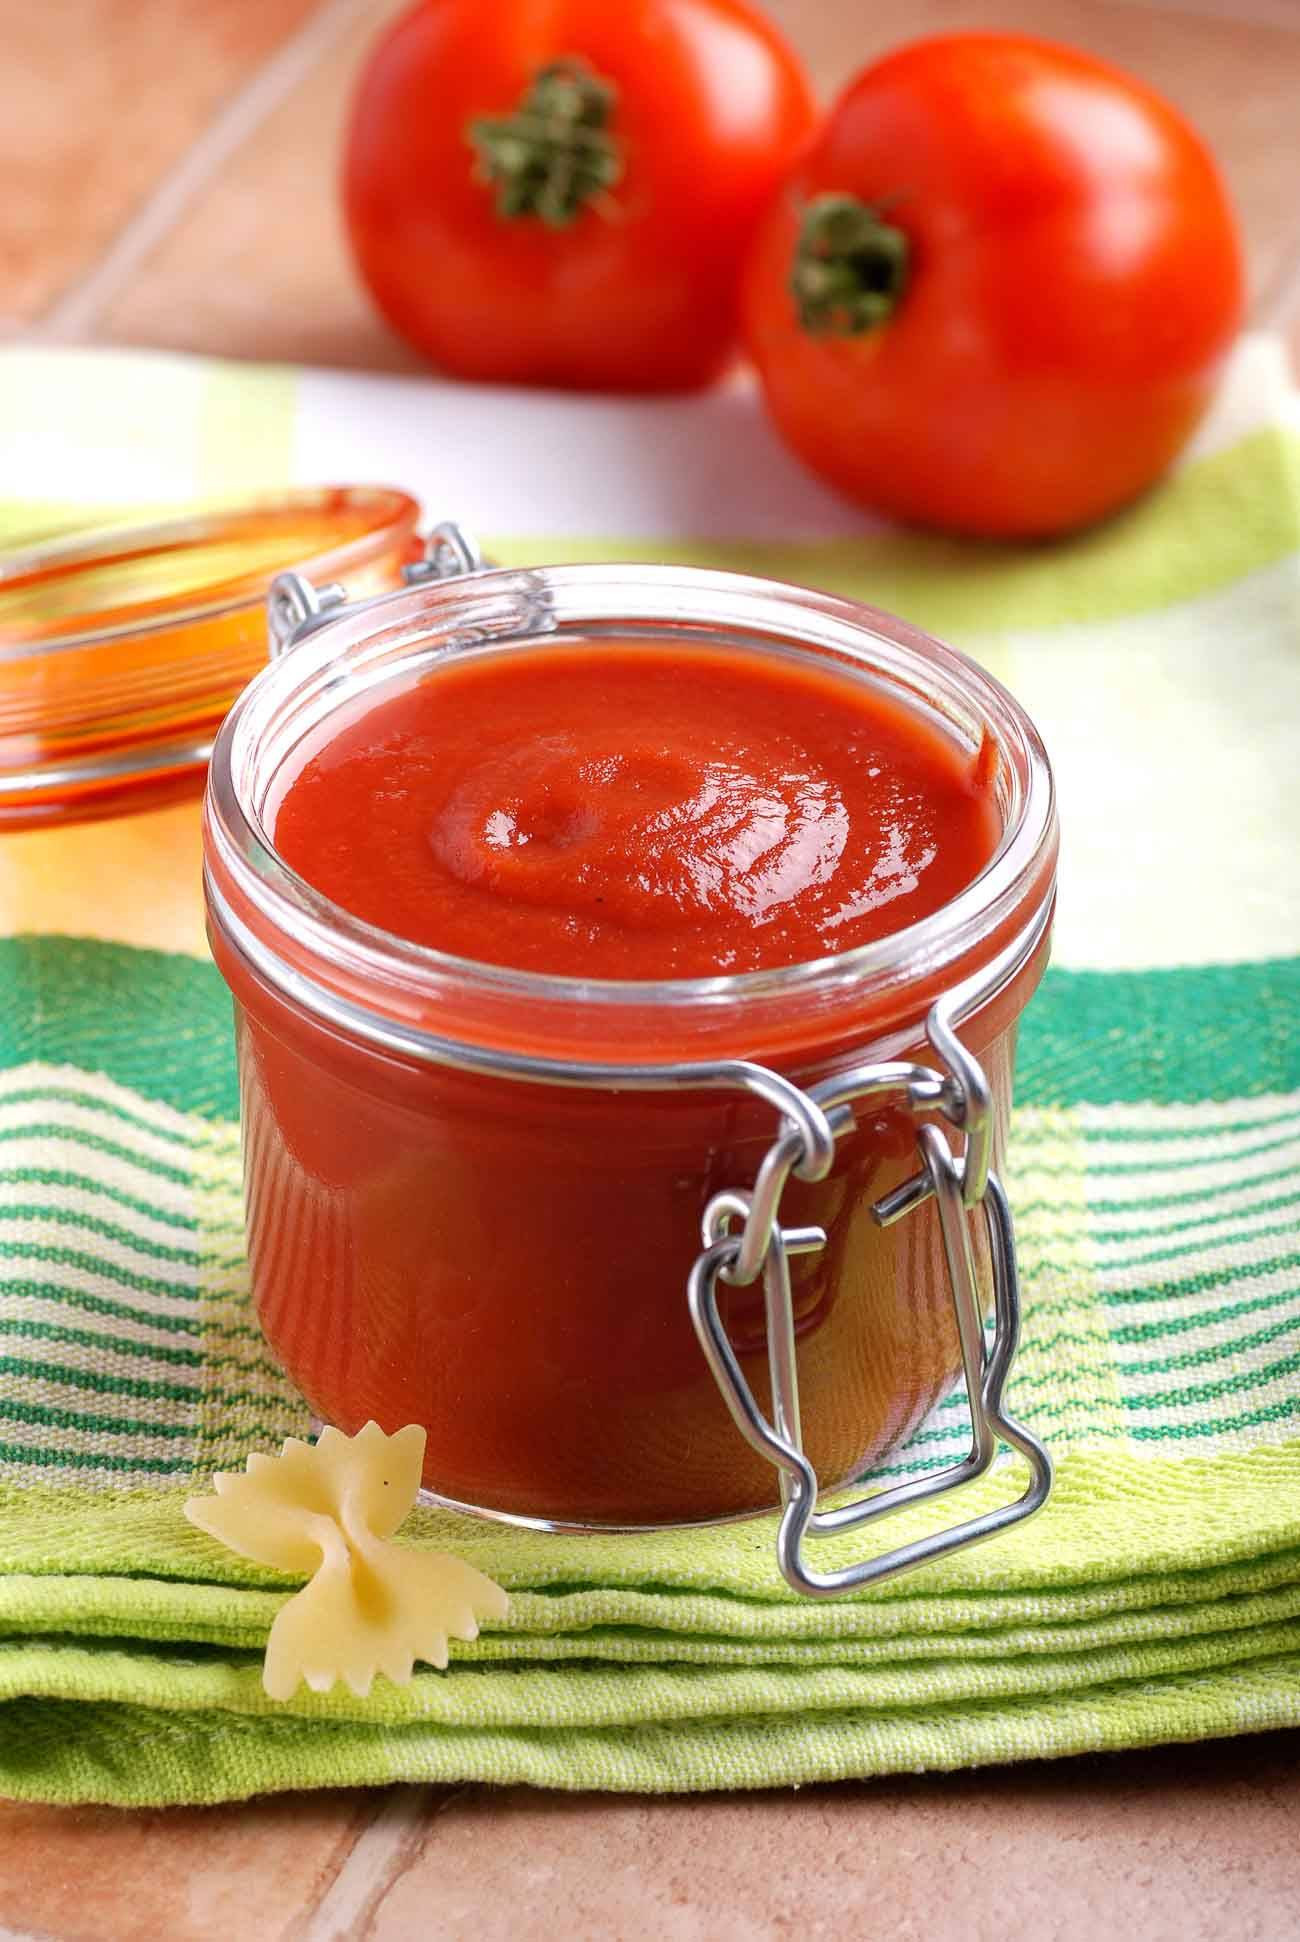 How To Make Tomato Sauce Out Of Tomato Paste
 How to make Homemade Tomato Puree Recipe Sauce by